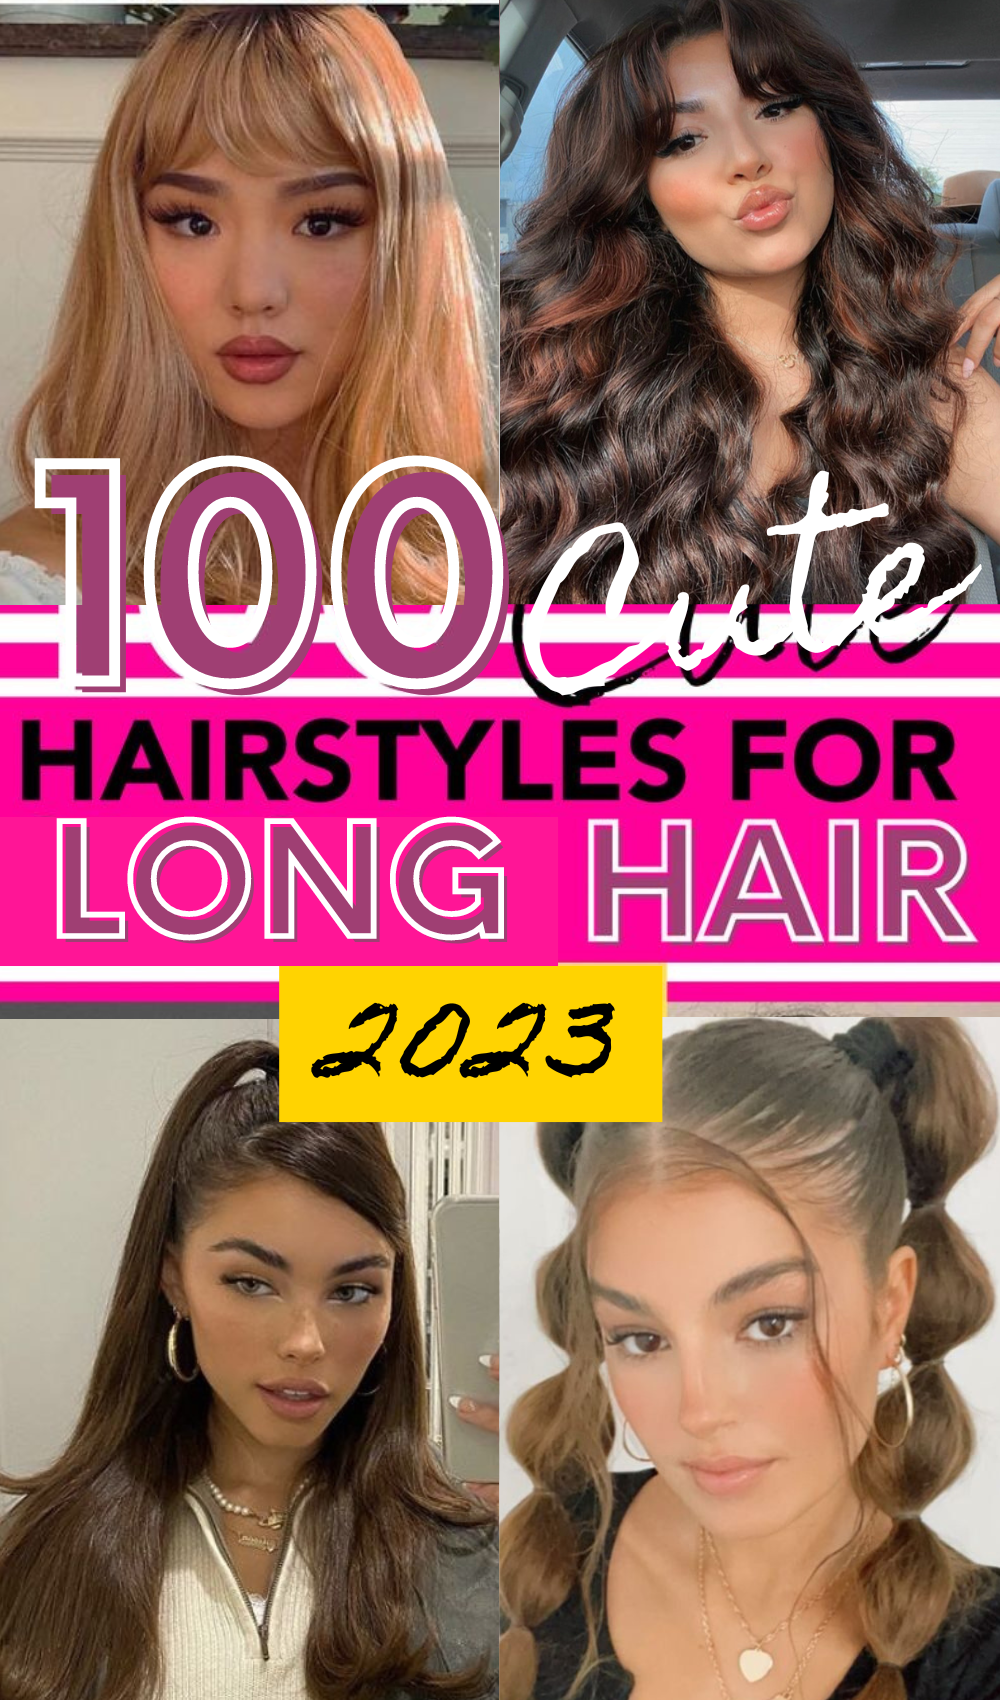 Low ponytail hairstyles for black women 2022-2023 | Low ponytail hairstyles,  Ponytail hairstyles, Hair ponytail styles